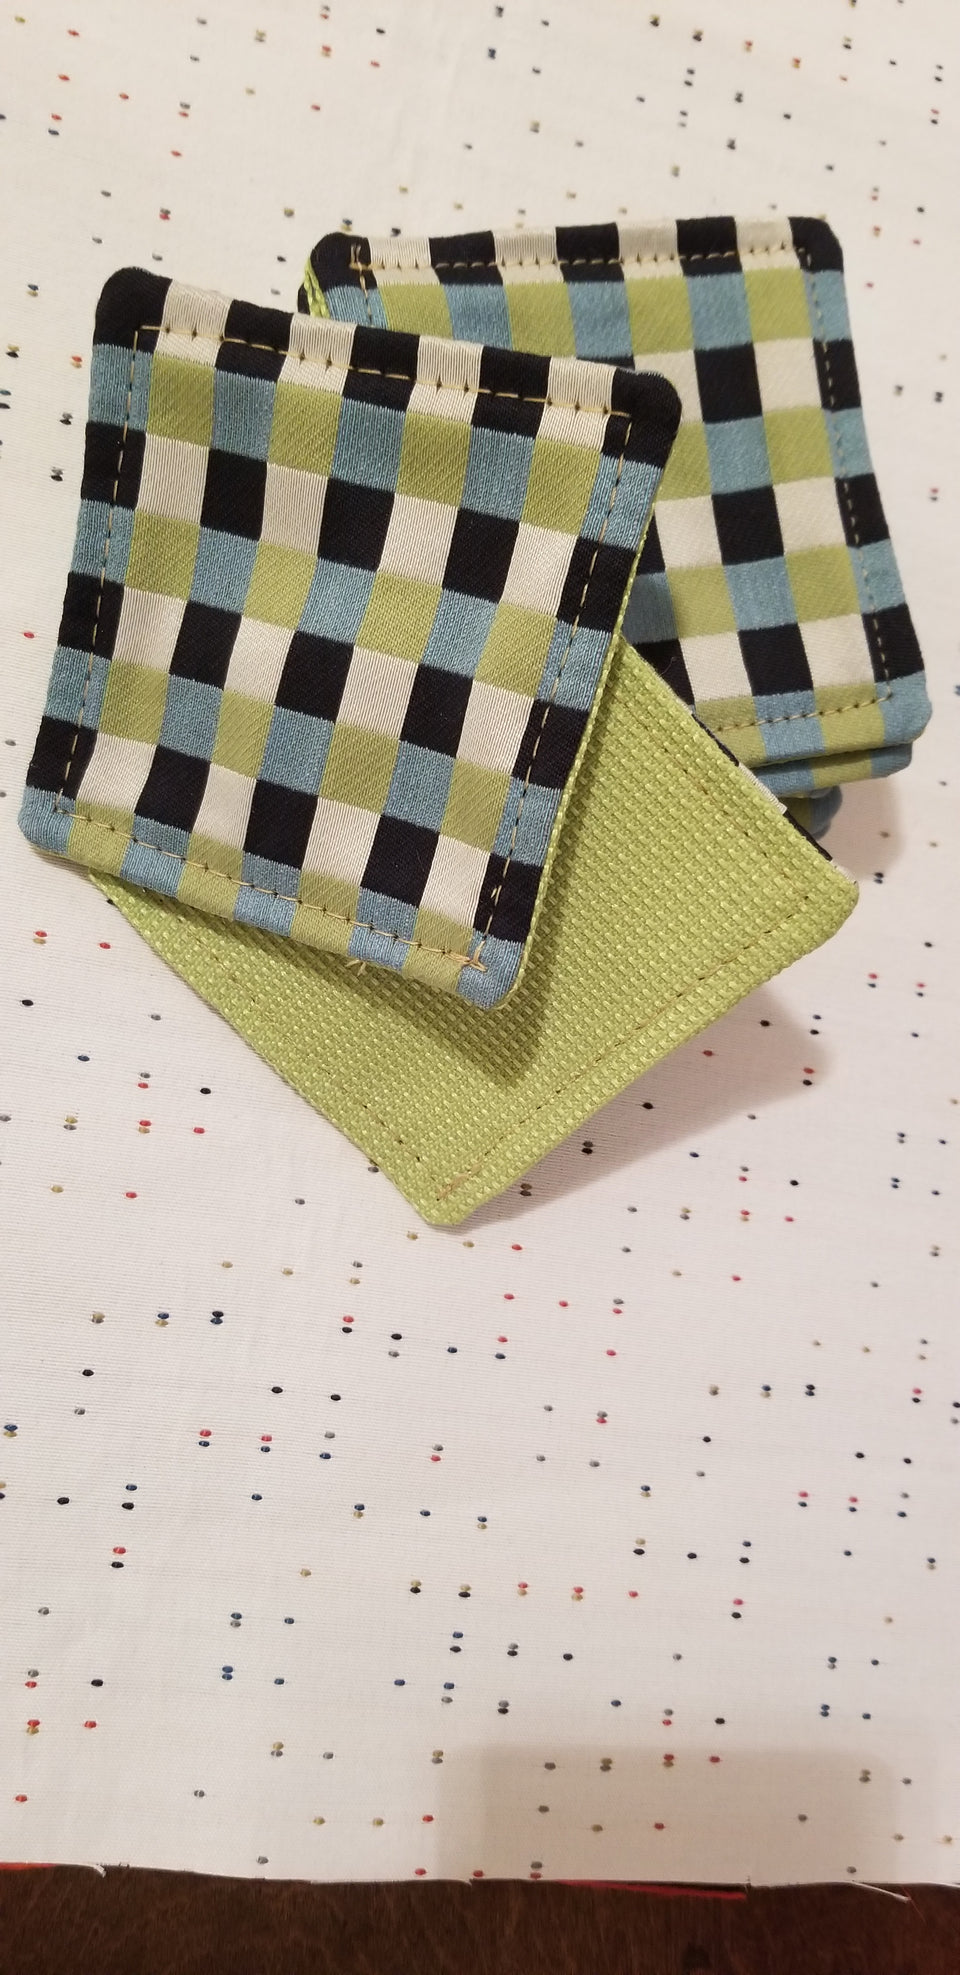 Chuck black, white, lime green, and turquoise gingham check patterned coasters front back detail top view.